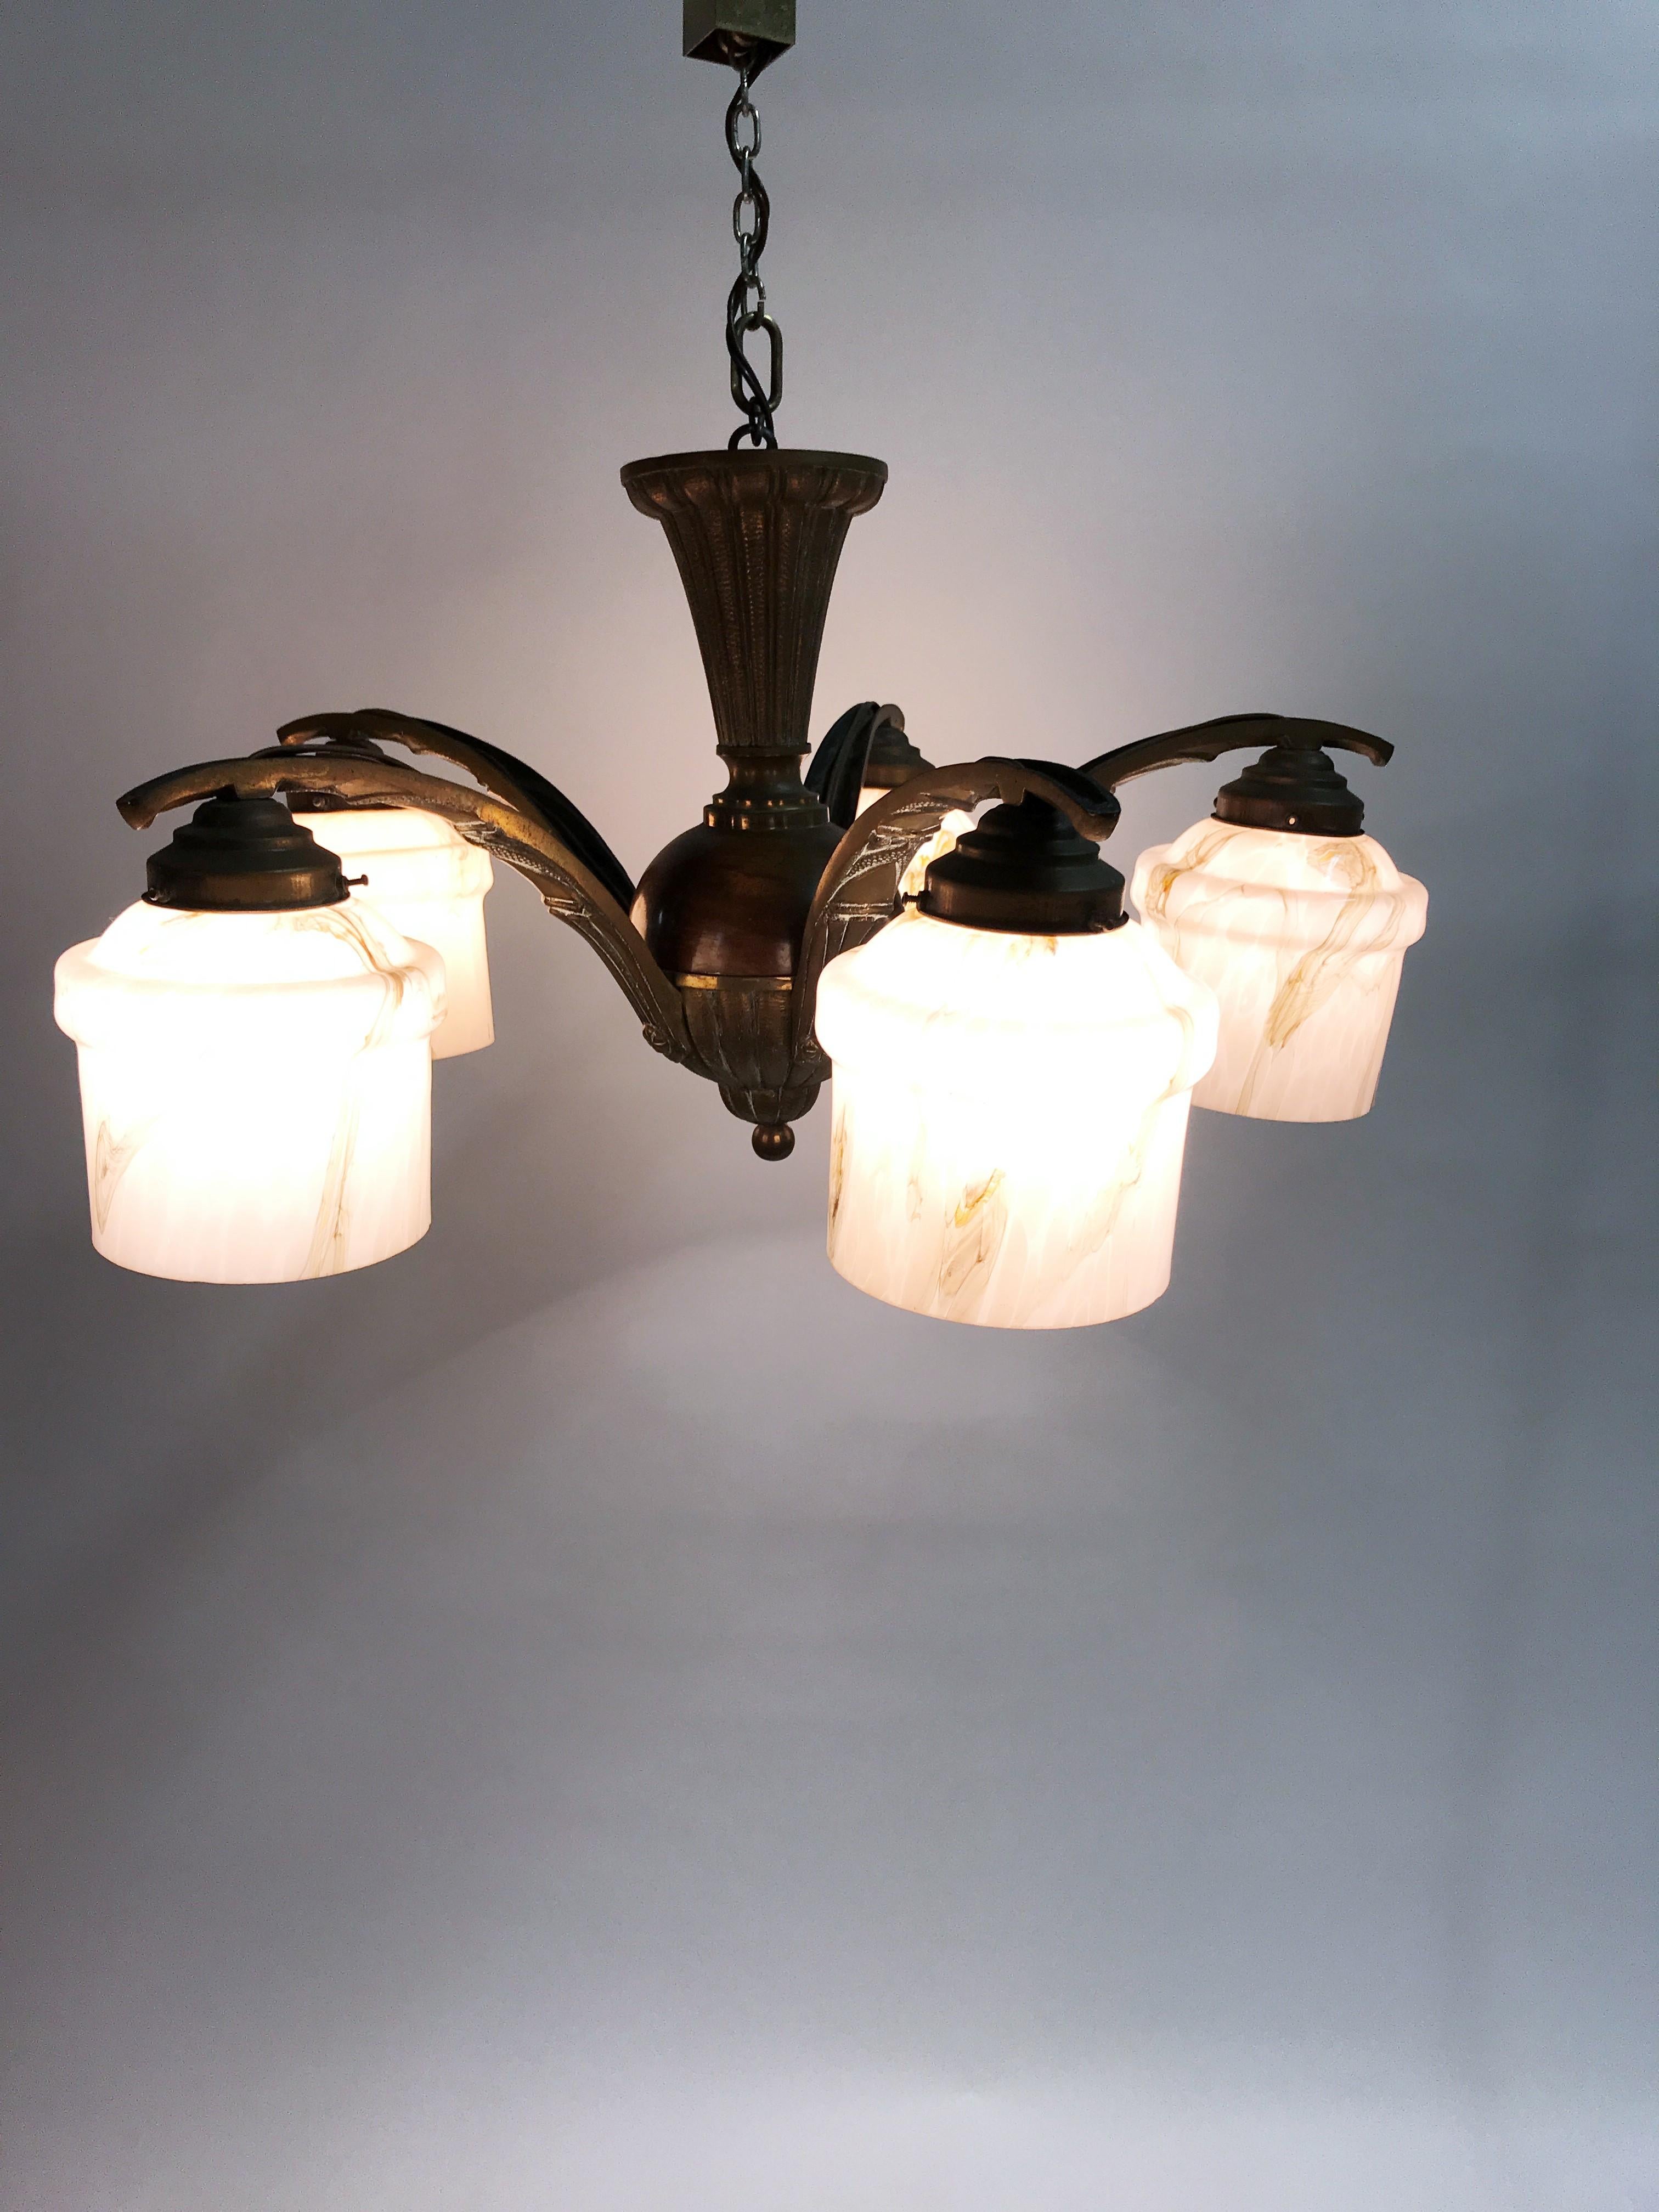 Art deco era chandelier with pink marbled glass shades.

This 5 lightpoint chandelier is made bronze and wood.

The marbled shades give a wonderful light effect.

Good original condition.

Tested and ready for use with regular E27 light